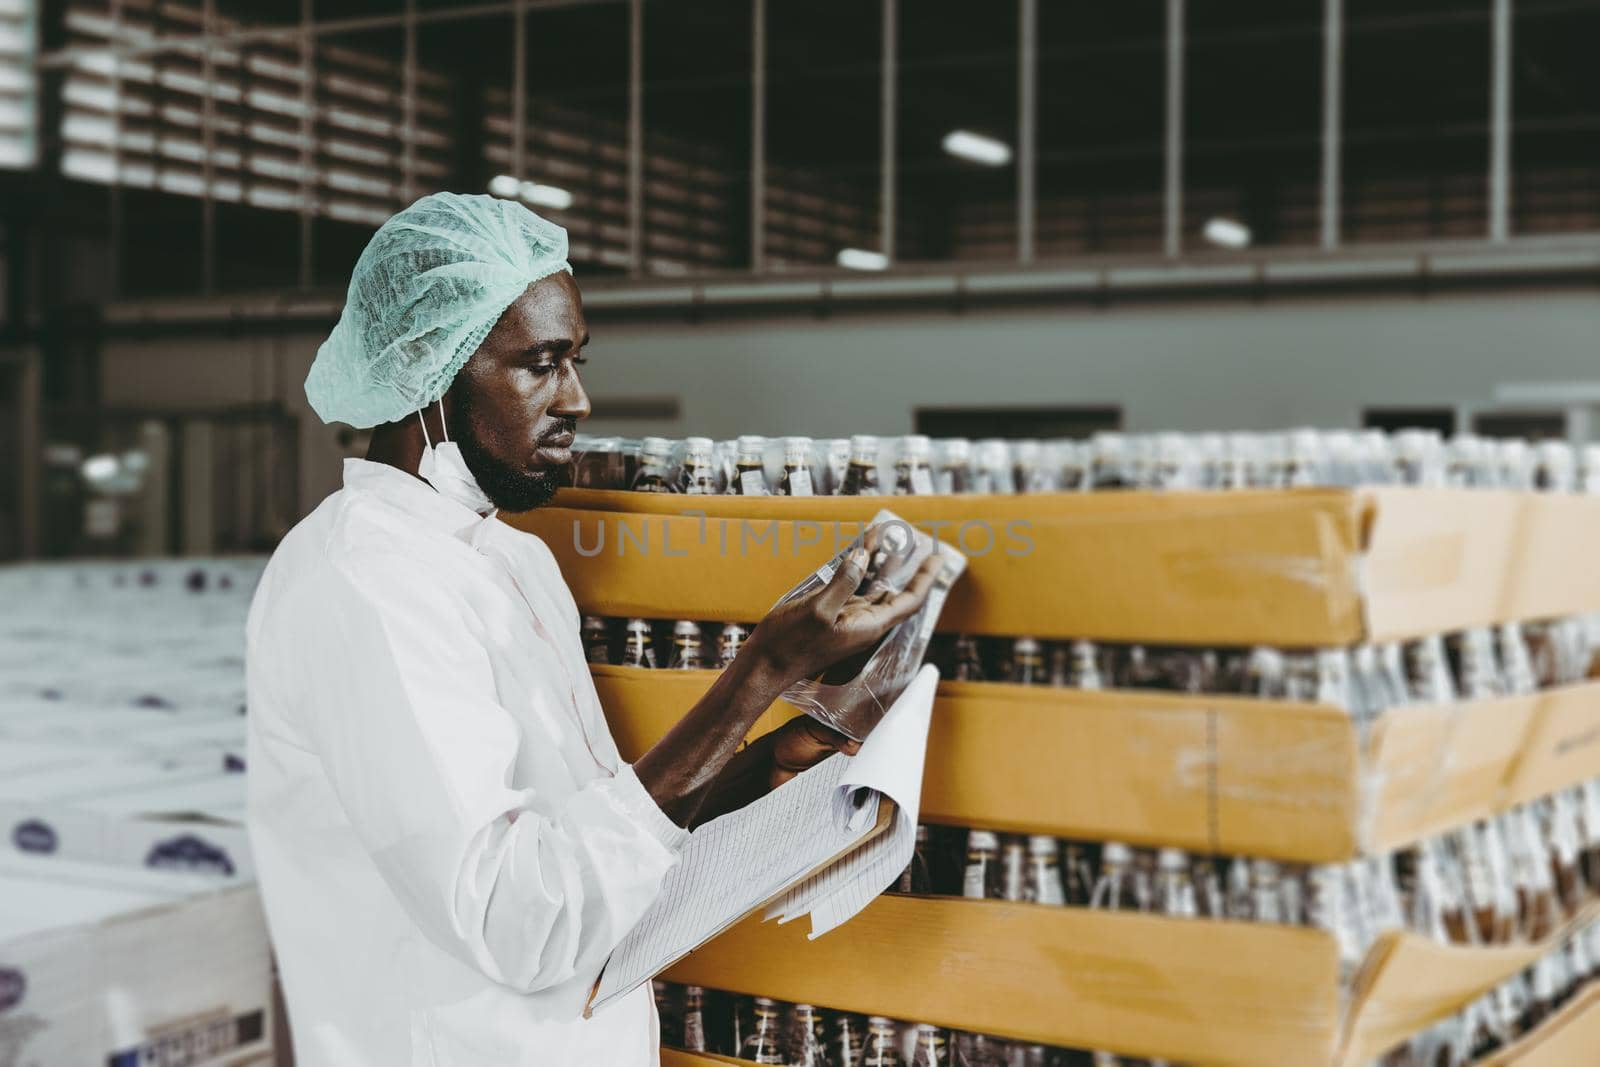 Black African worker working in industry factory products checking inventory stock in the warehouse.